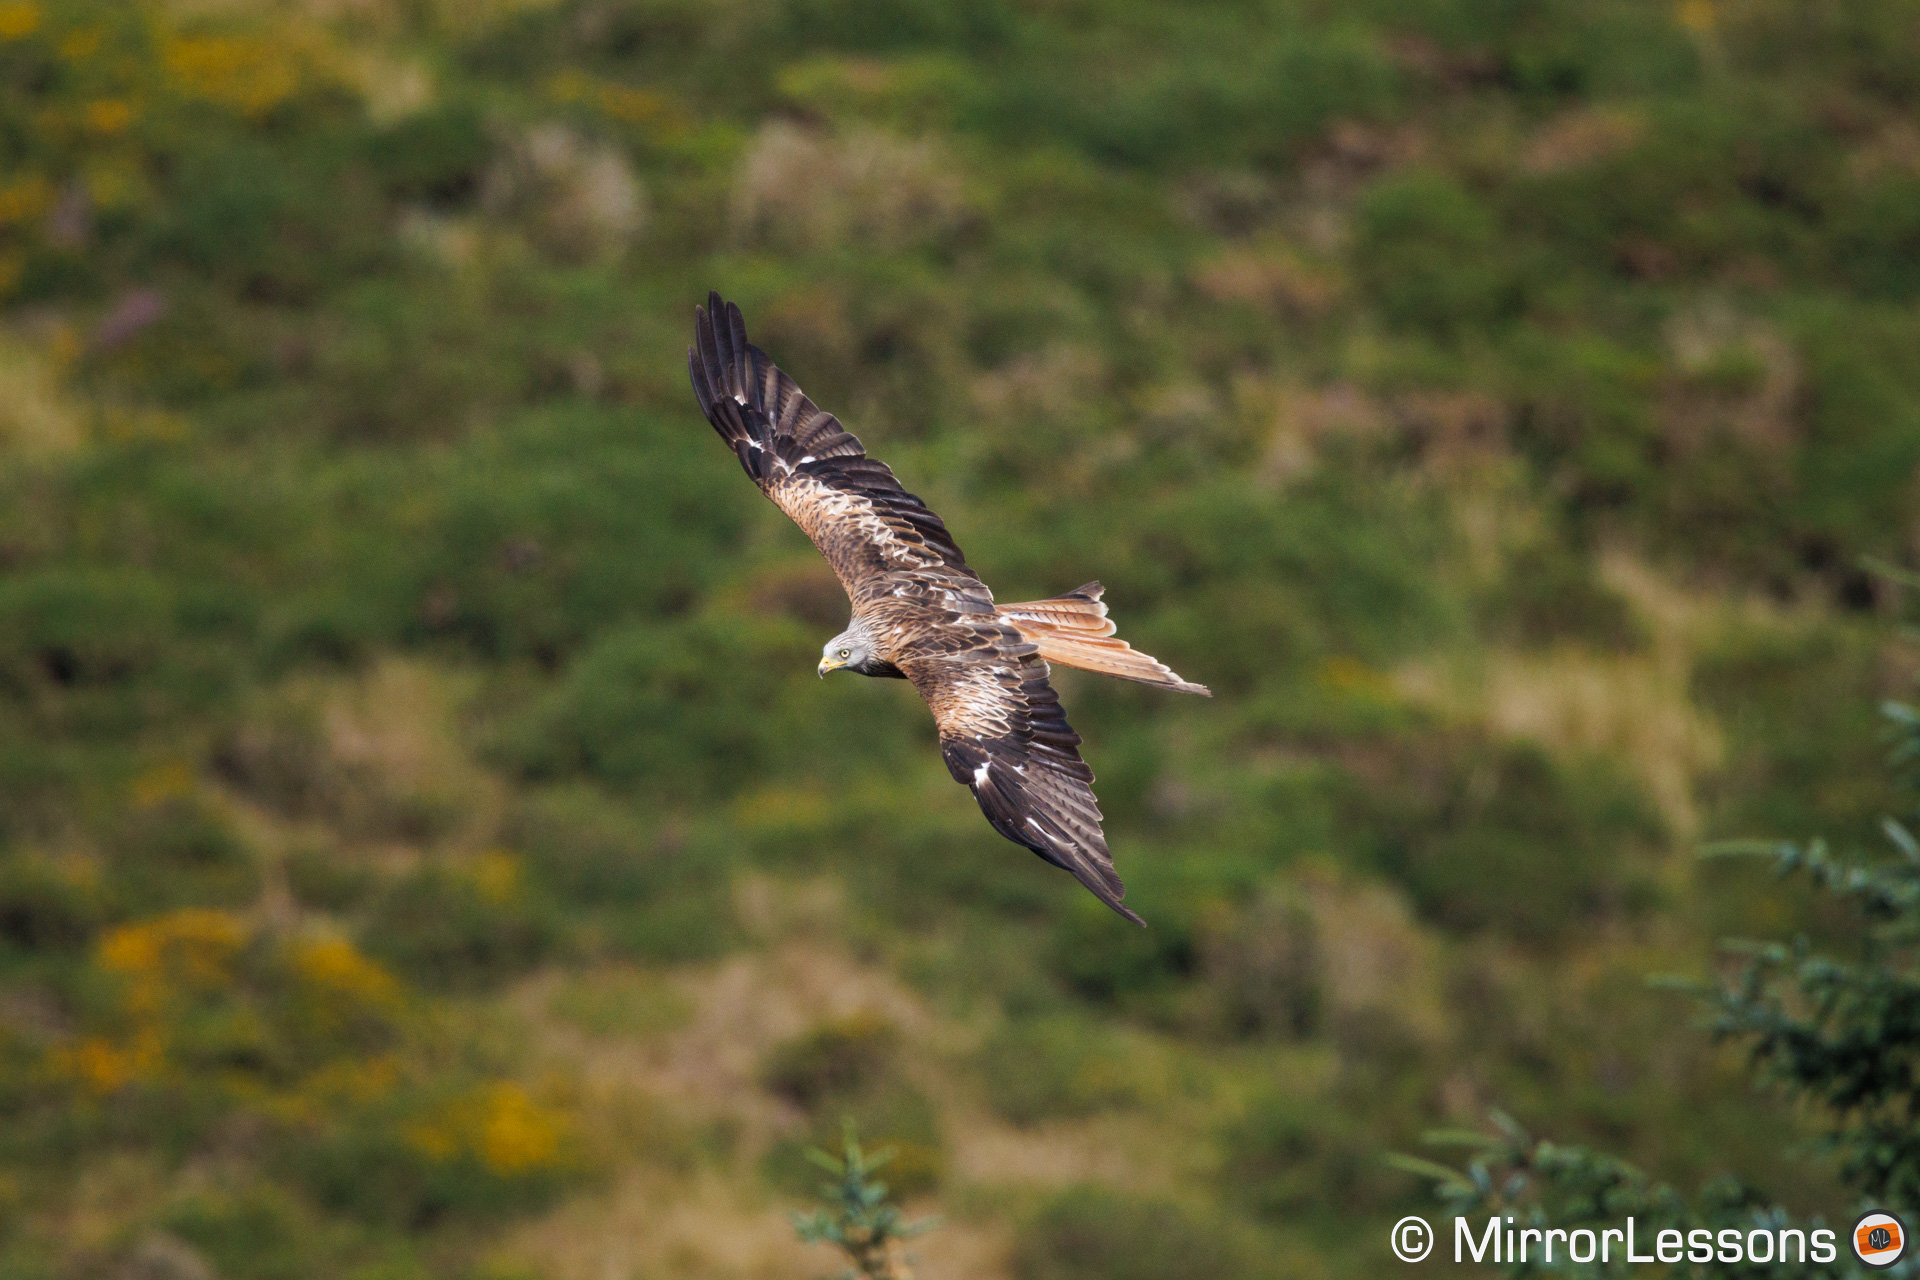 Red kite flying against a hilld with patches of green vegetation.